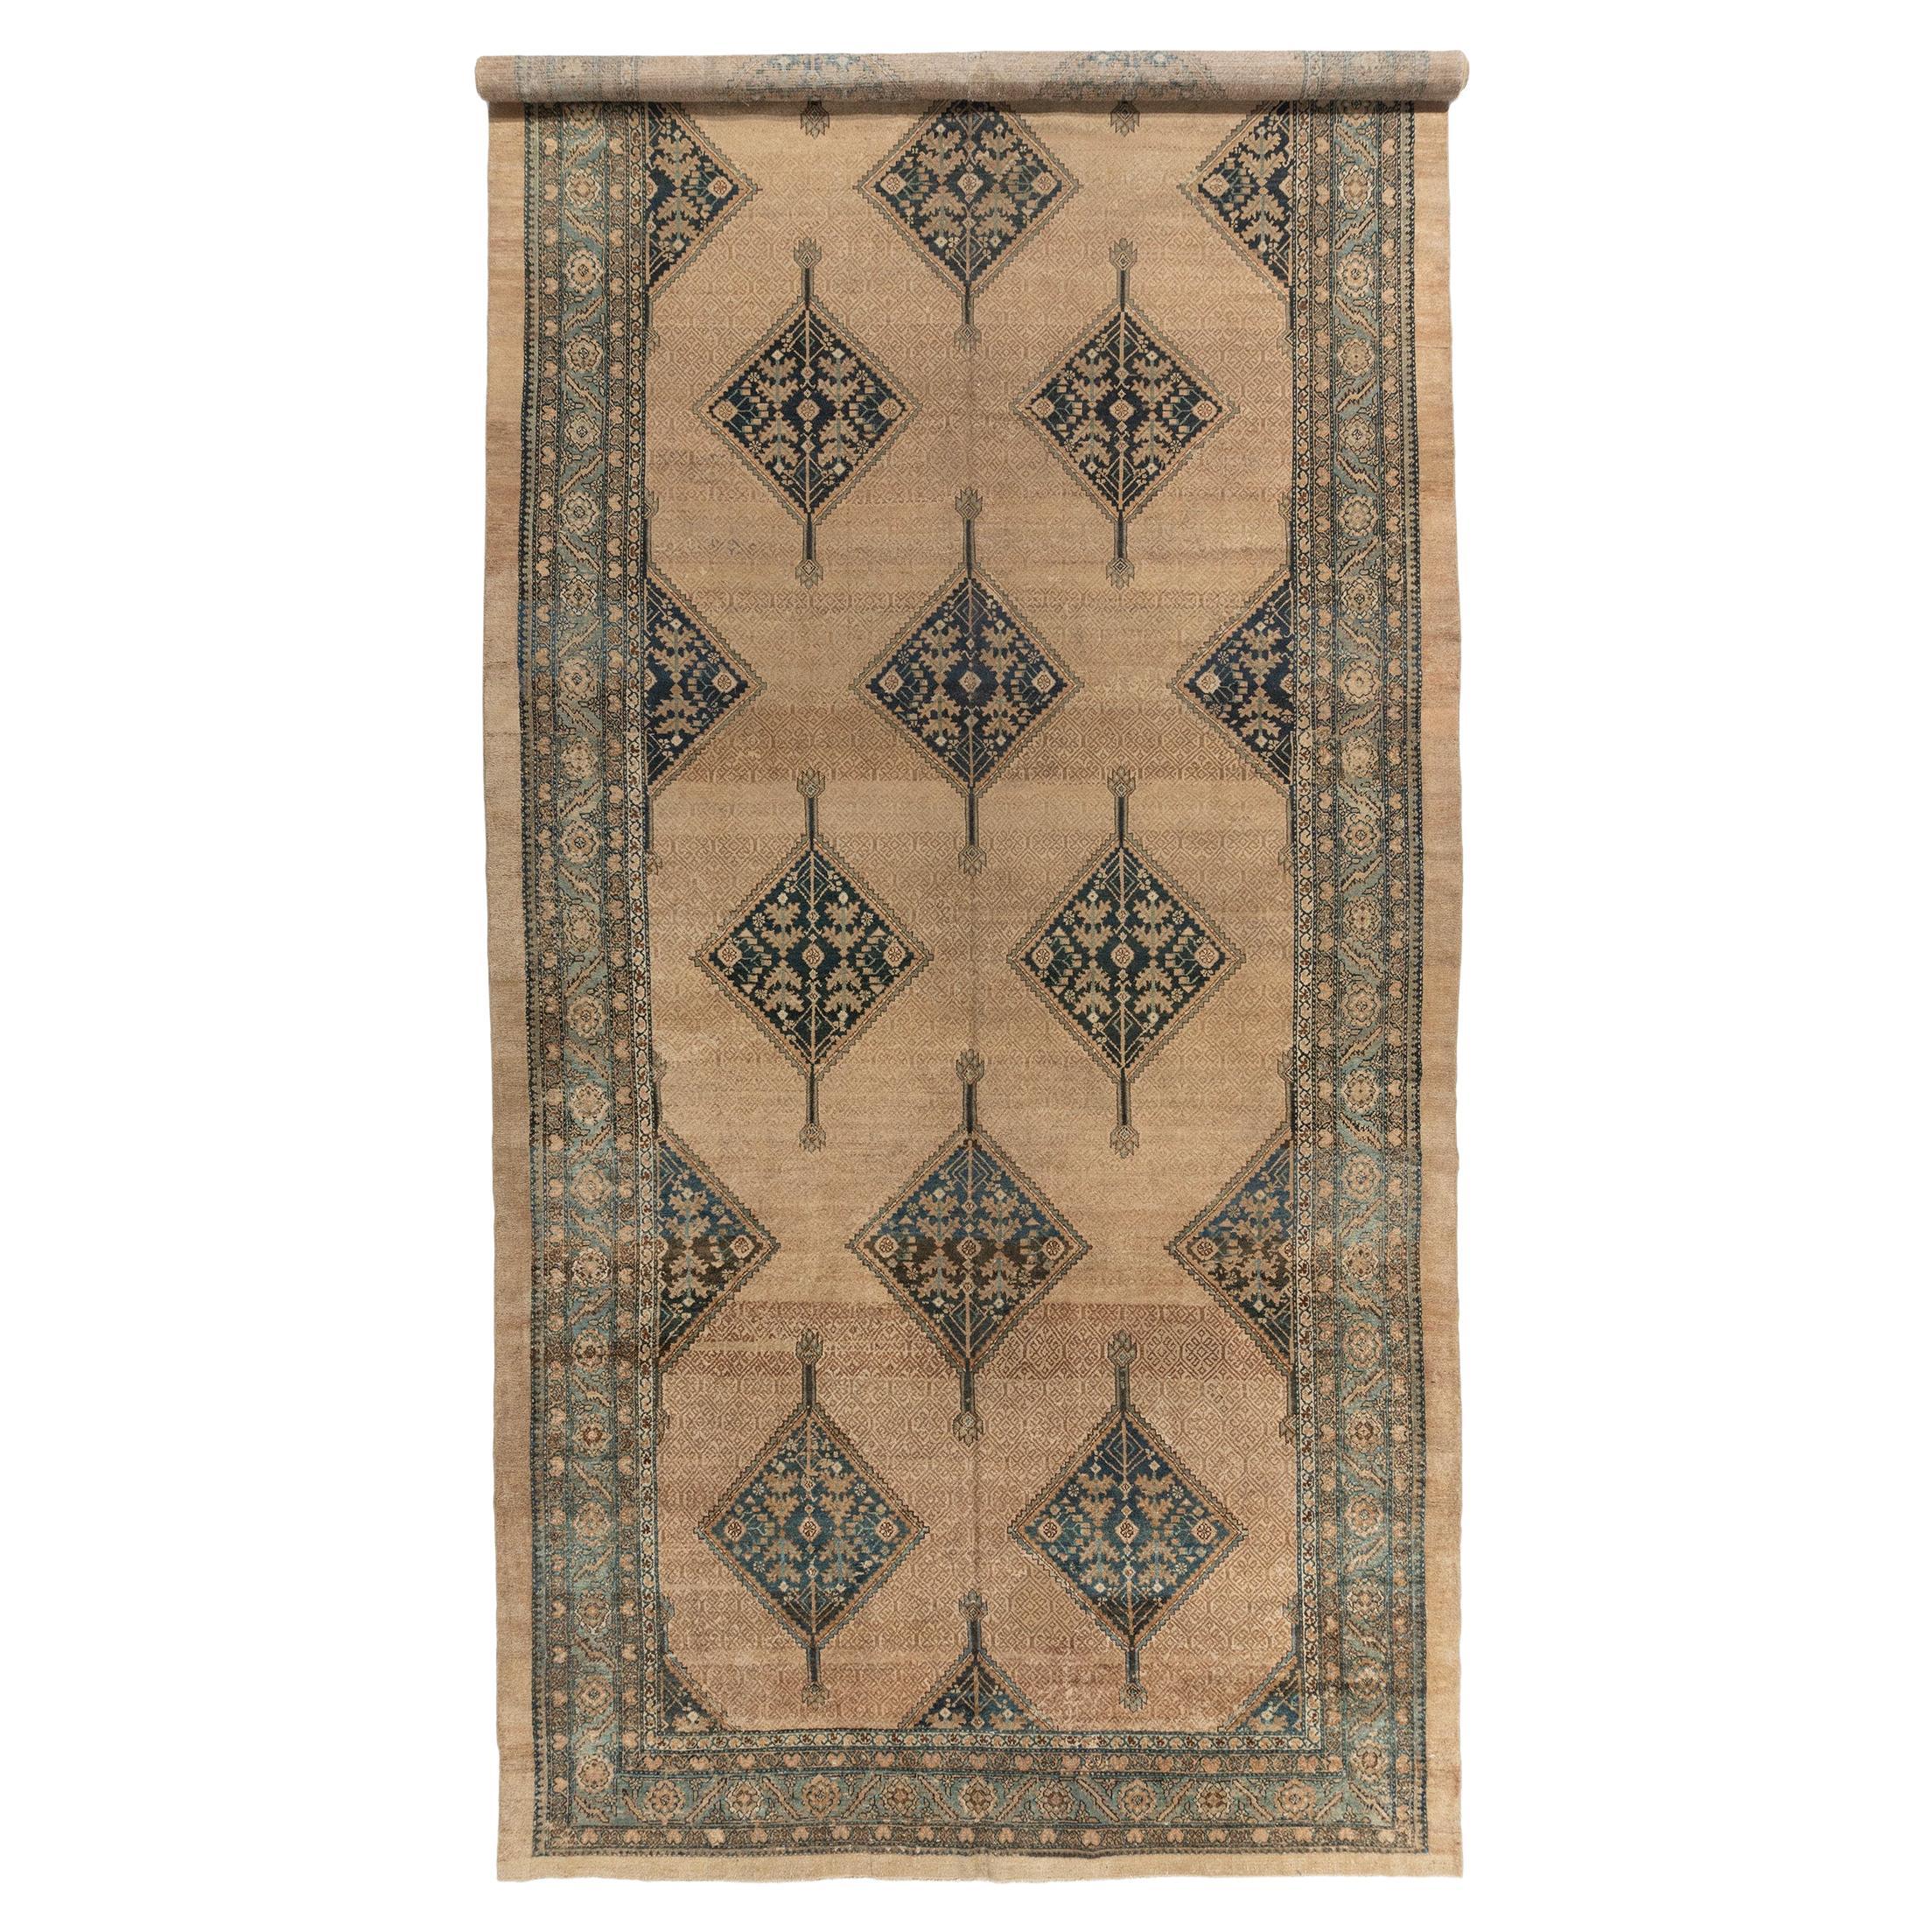 Antique Persian Serab Gallery Rug 7'10 x 19'2 For Sale